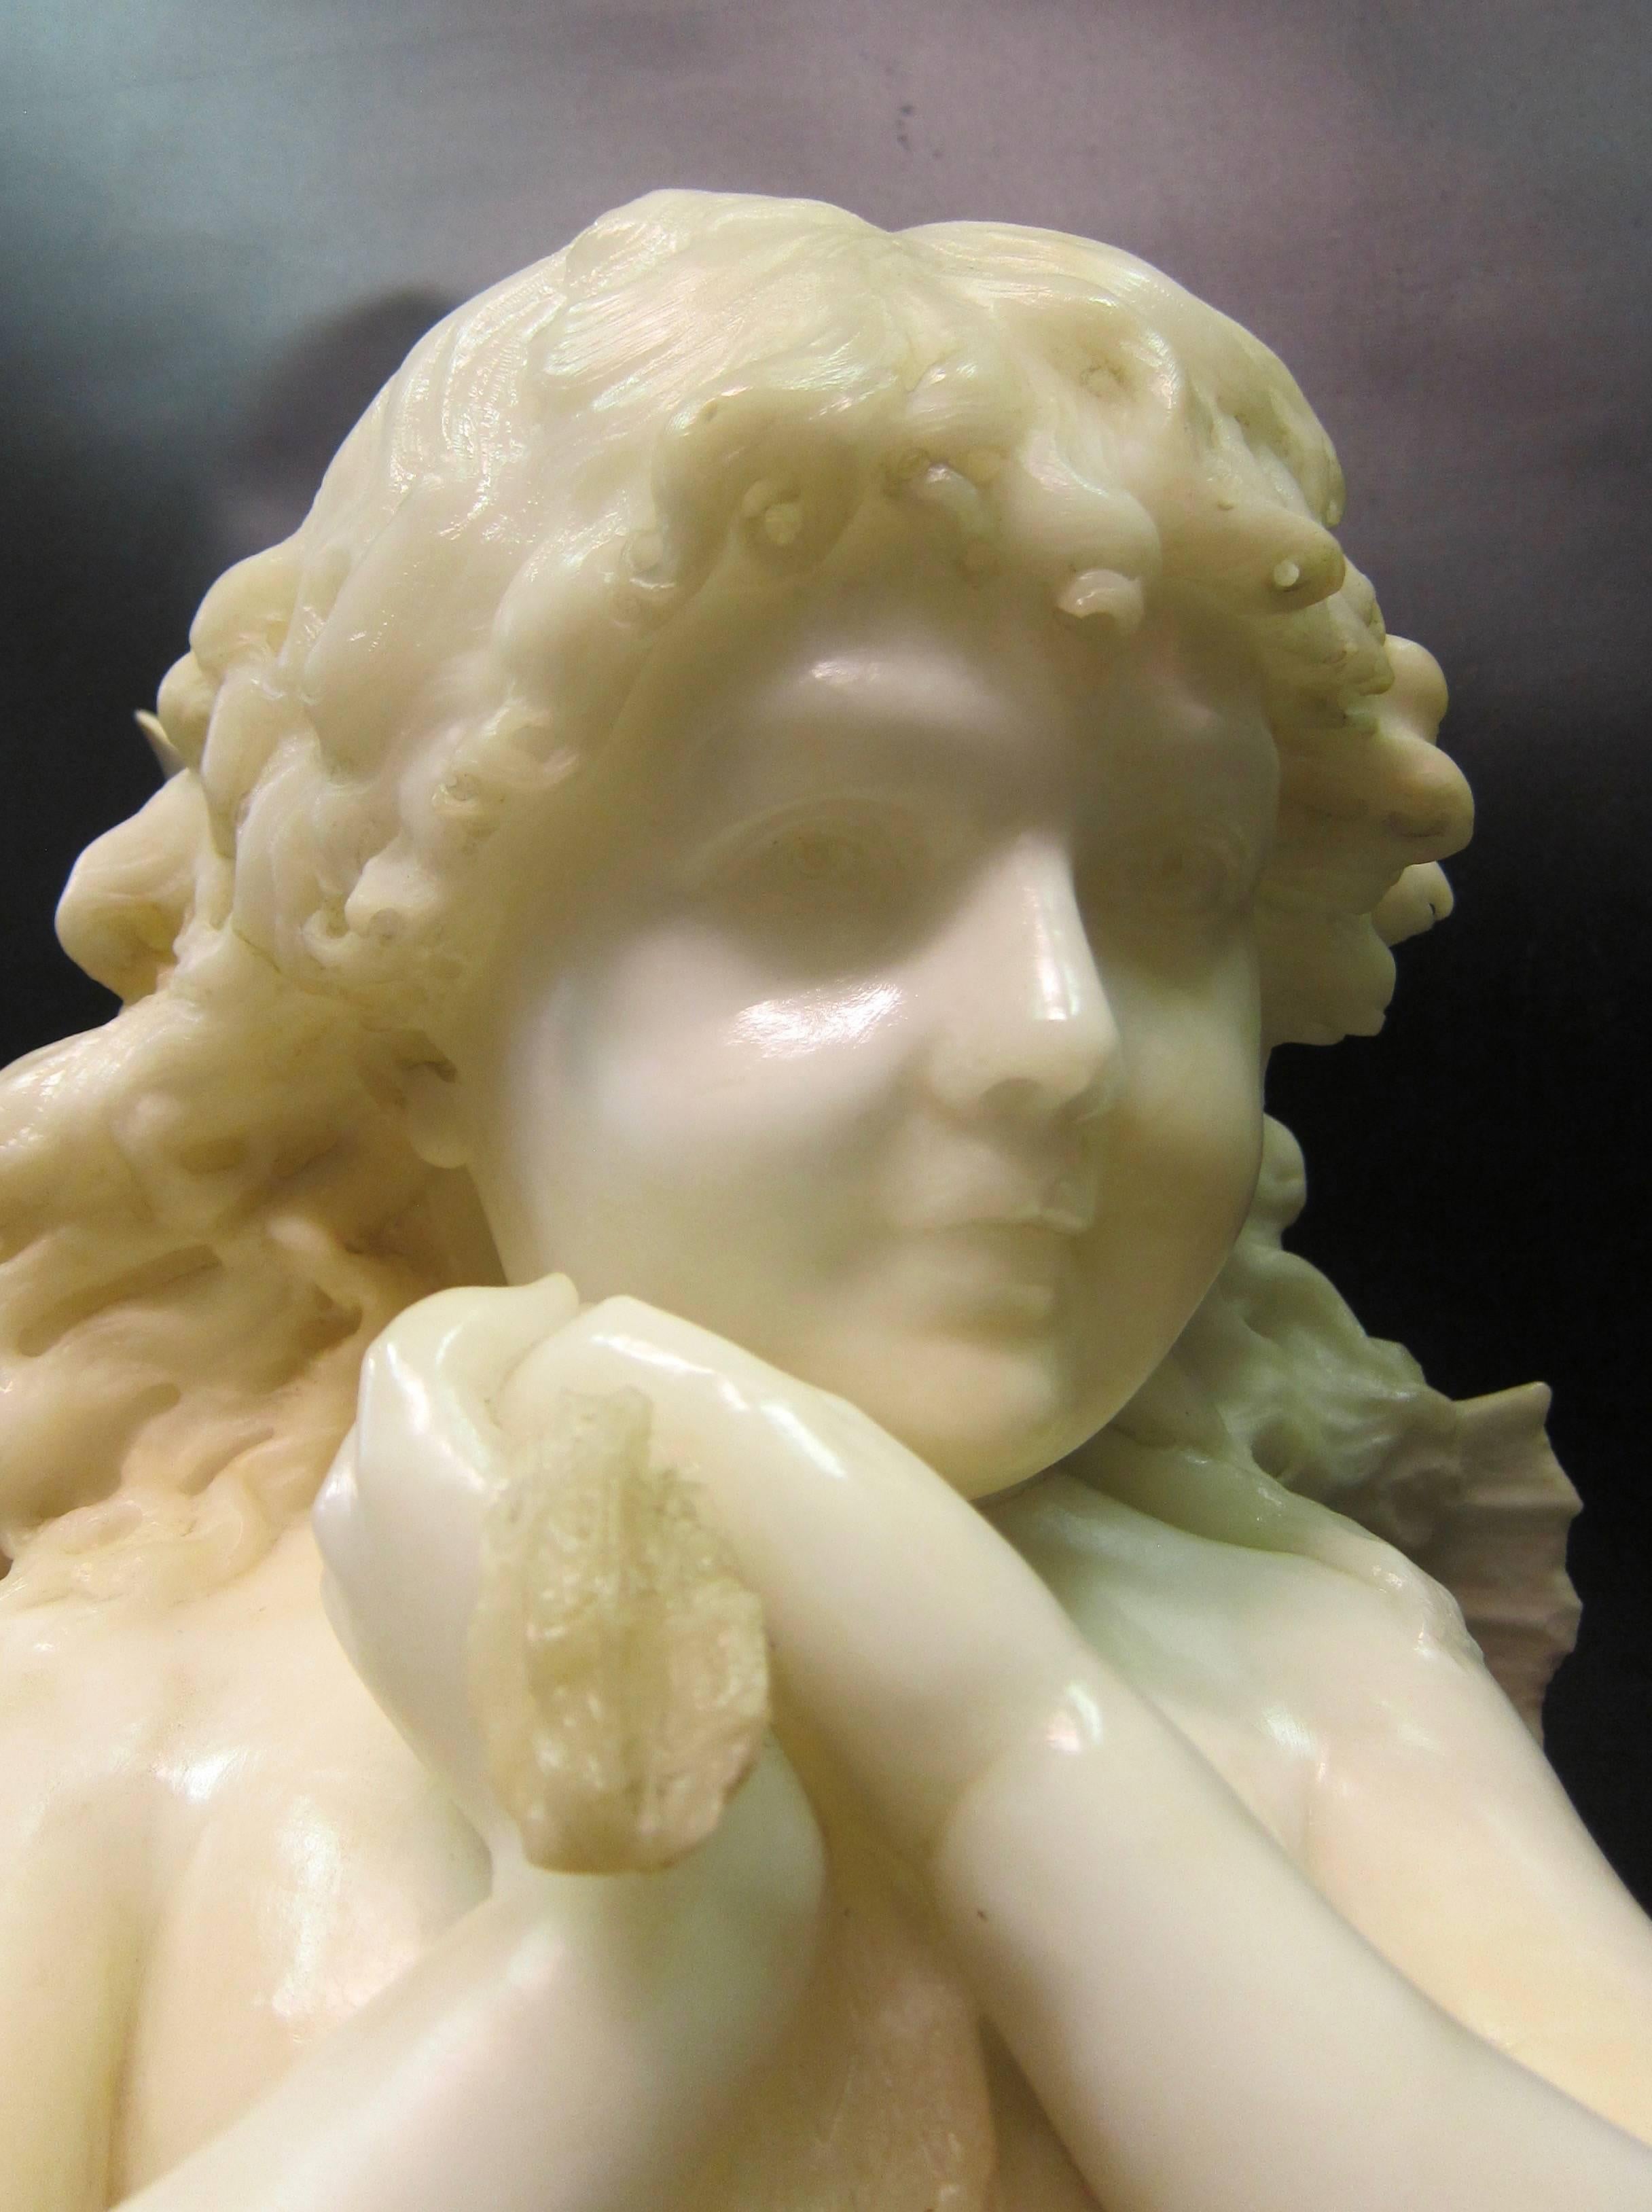 This vintage late 19th century hand carved marble bust is of a charming child like fairy. The sculpture is signed by the artist, Enrico Lapini, 1891. This beautiful white marble is masterfully carved & mounted upon a rouge colored platform base.